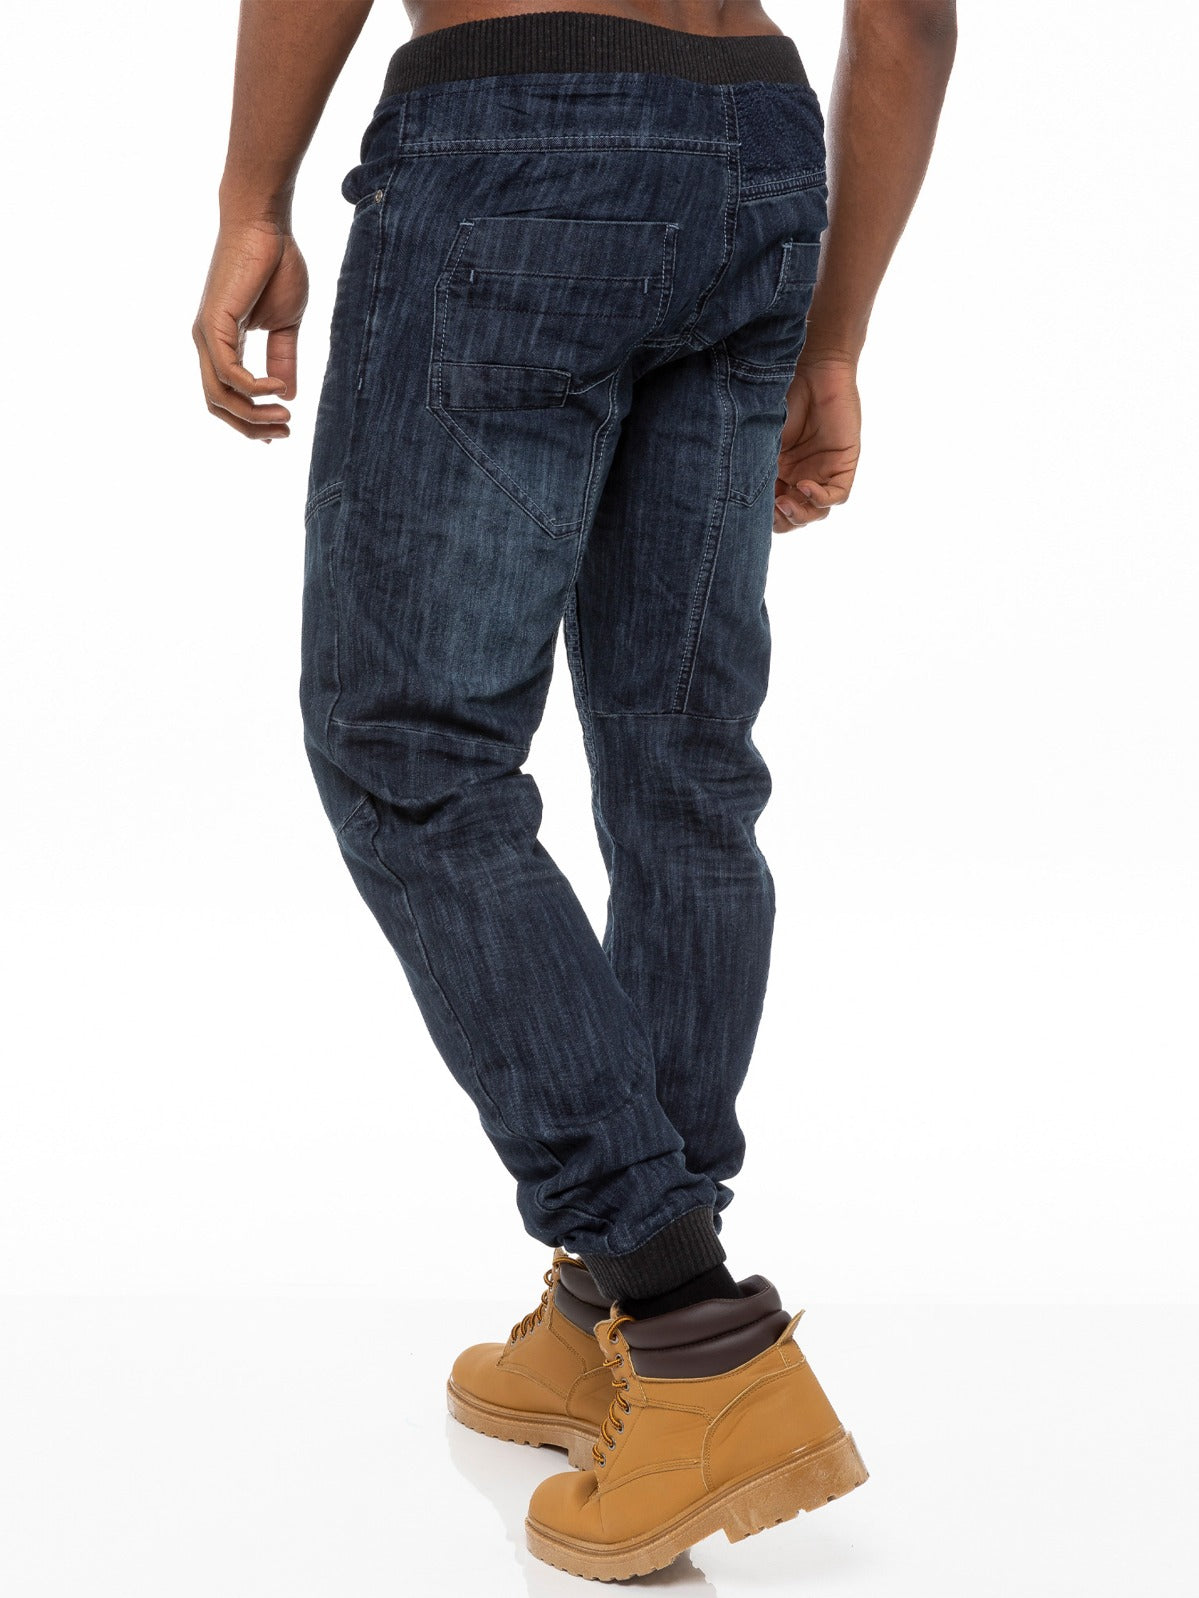 Official Enzo Designer, Mens Denim Cuffed Joggers Jeans Navy